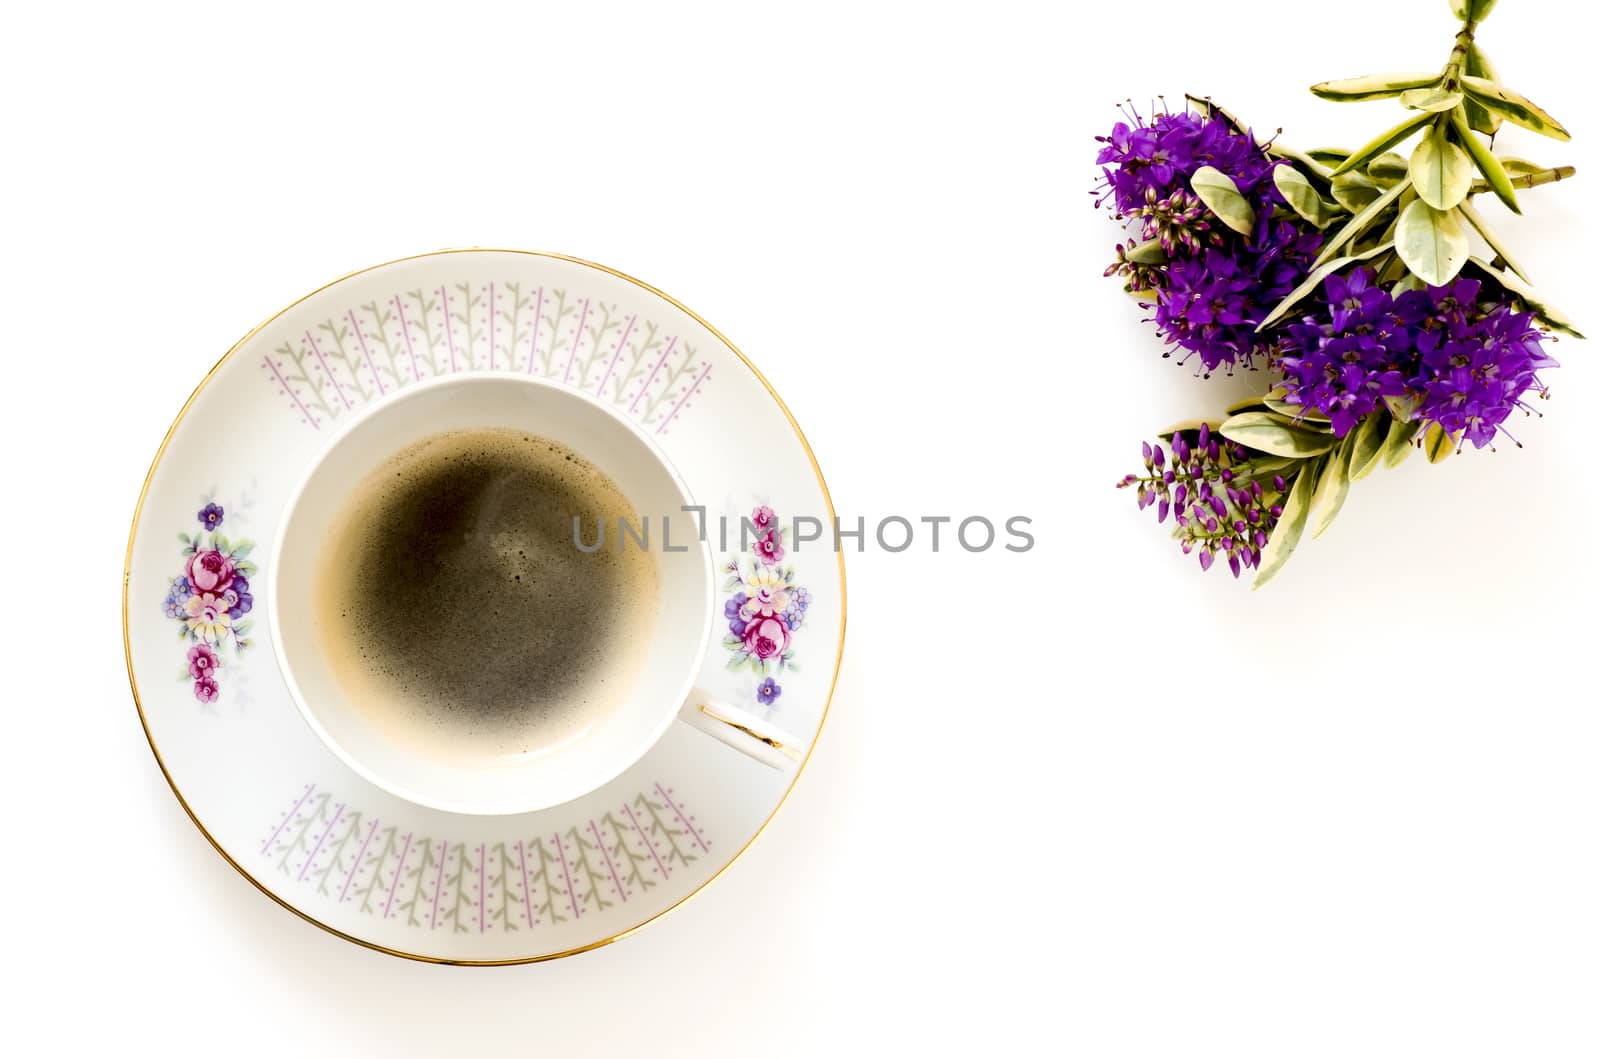 The cup of coffee by bongia